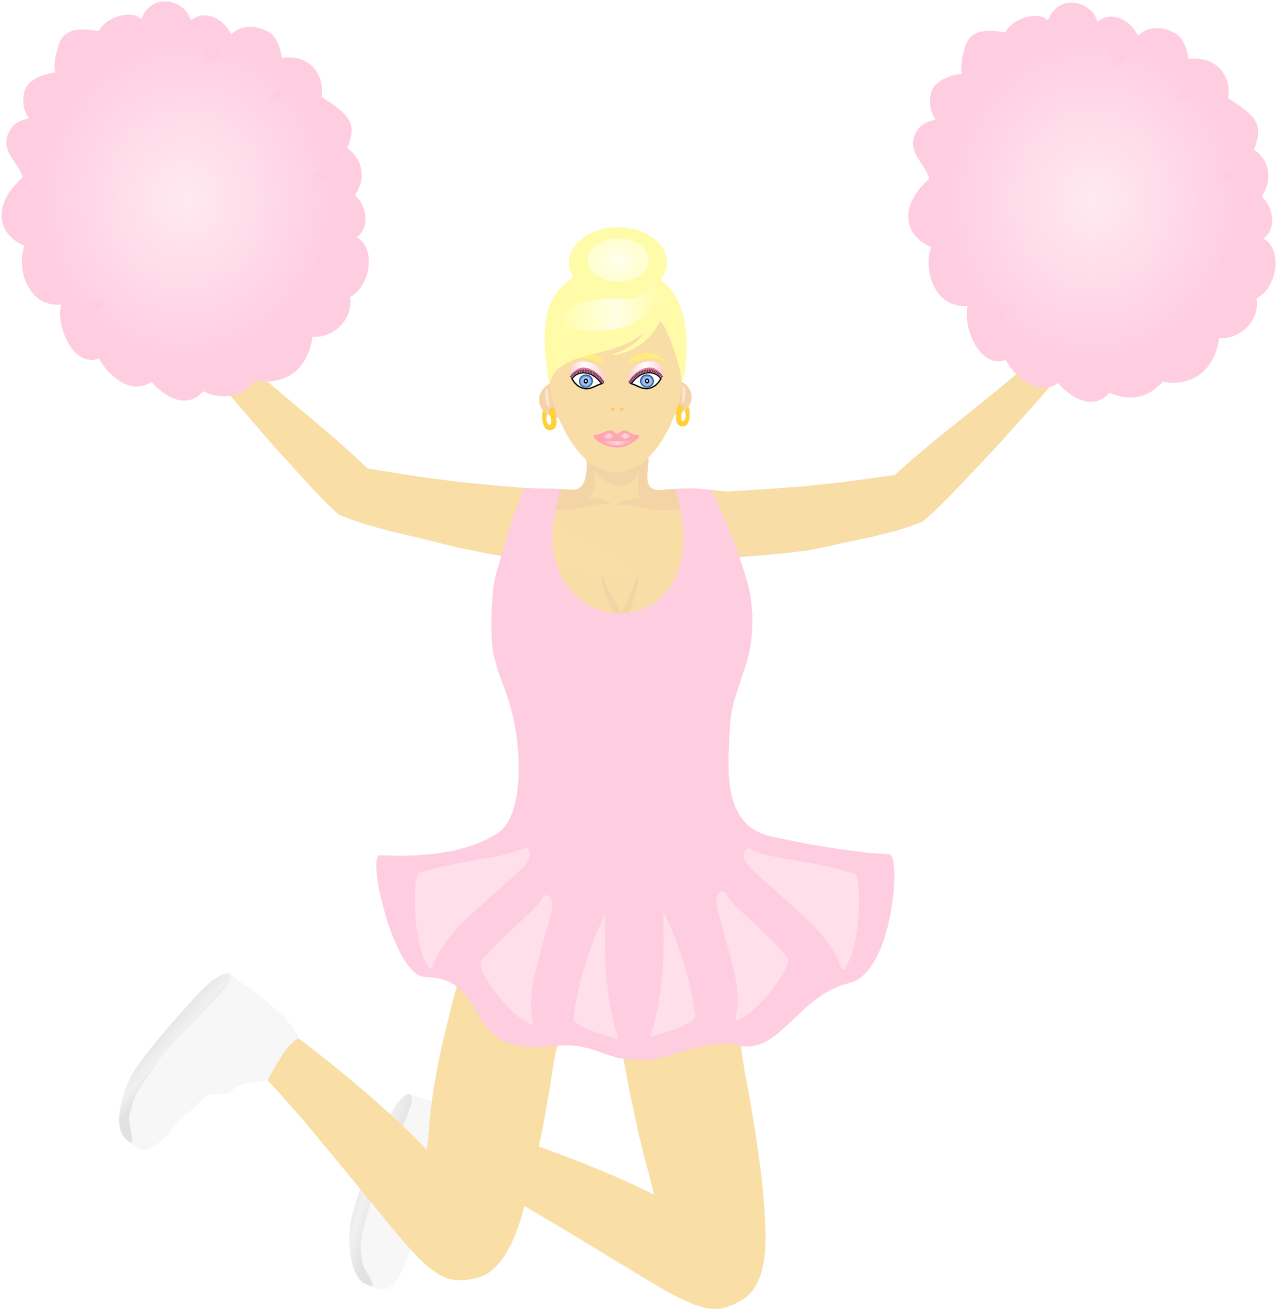 Cheer Toe Touch Clip Art Viewing 20 Images For Cheer - Wald Of Washington: The Fiddlestick Dare Foundation: (1331x1882)